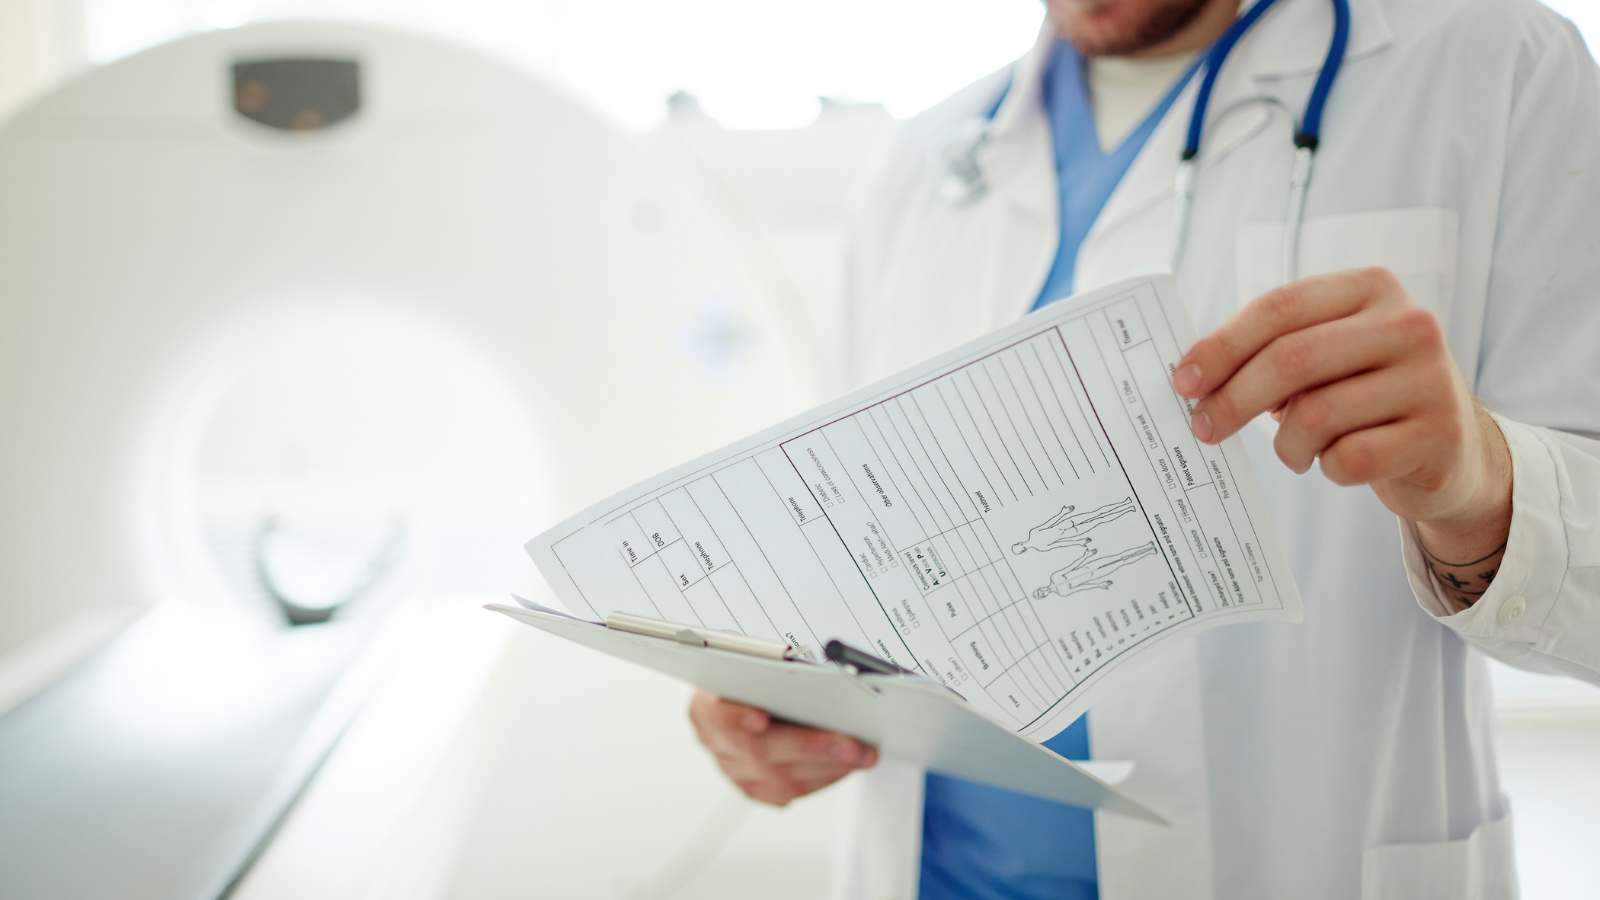 CMS Proposes Expanded Eligibility for CT Lung Cancer Screening